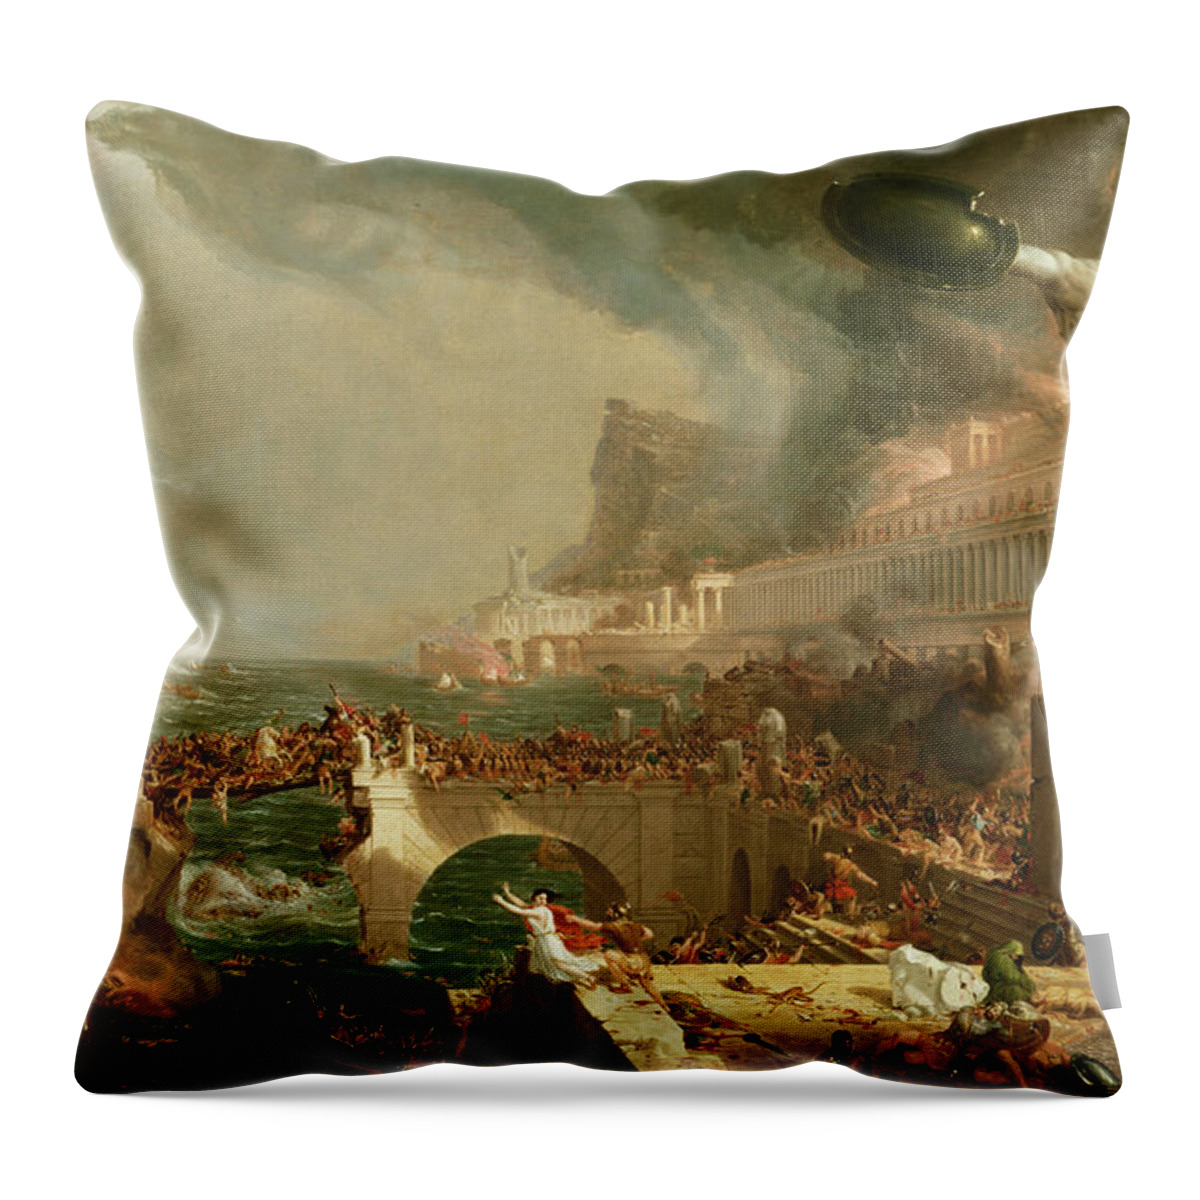 Thomas Cole Throw Pillow featuring the painting Destruction by Thomas Cole by Mango Art